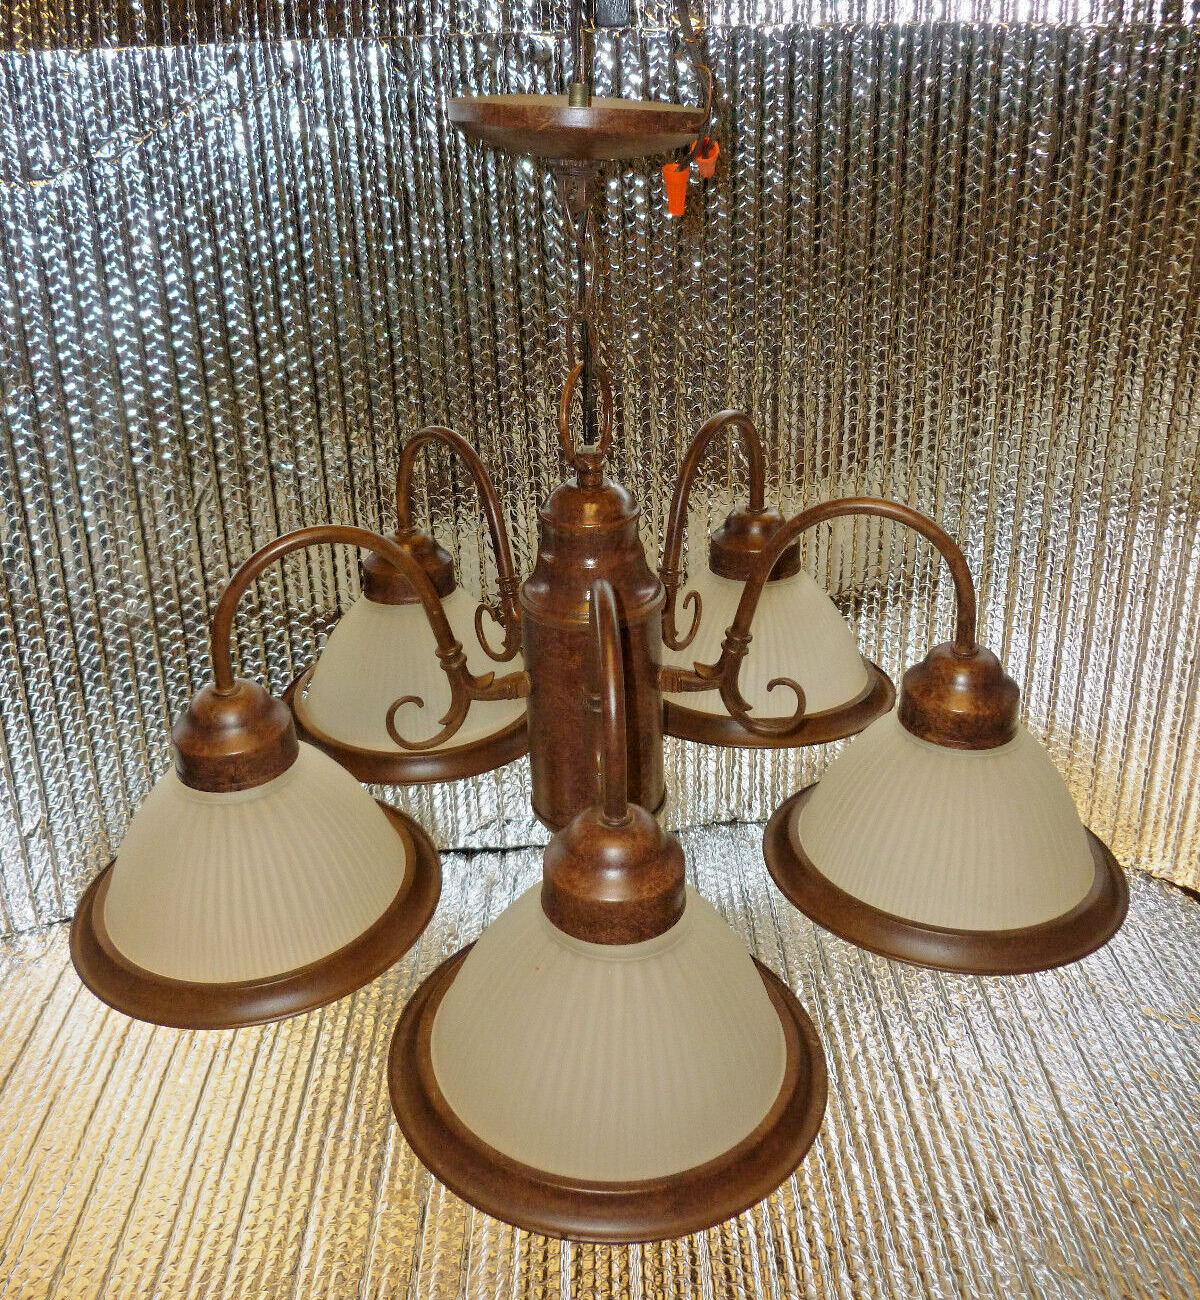 Chandelier Light / Ceiling Fixture 24” Wide / 5 Bell Shaped Frosted Light Shades